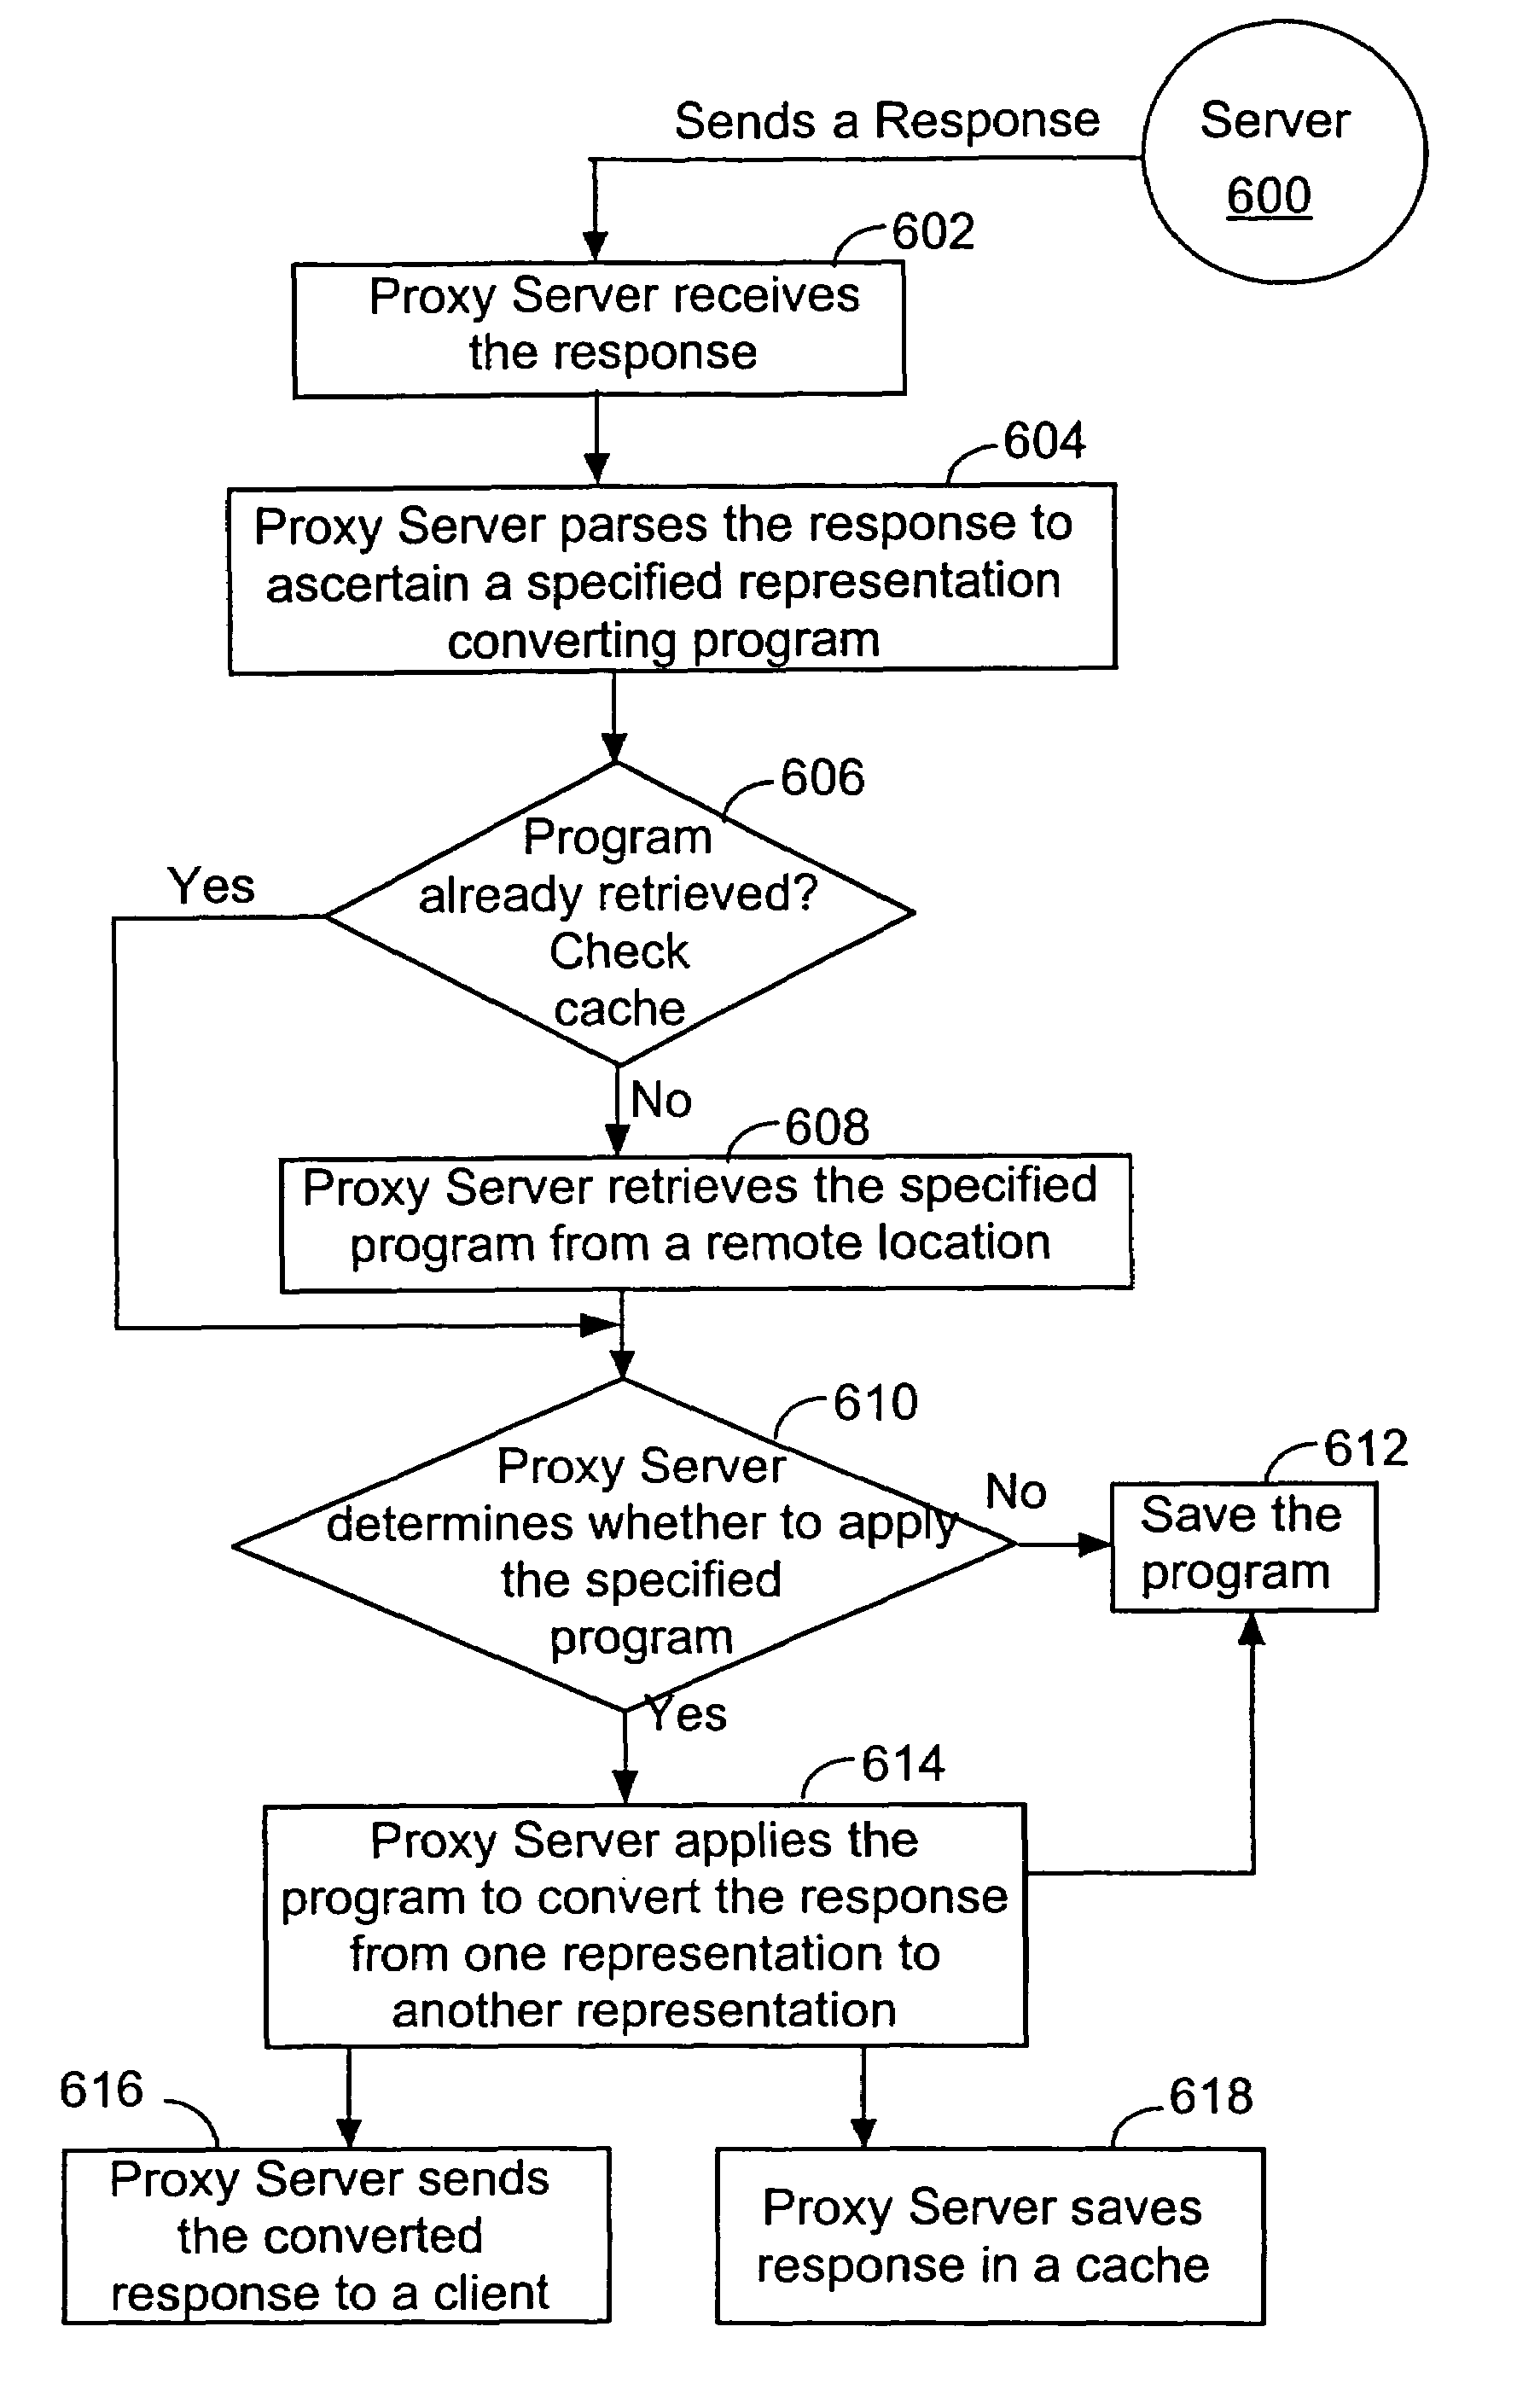 Explicit server control of transcoding representation conversion at a proxy or client location